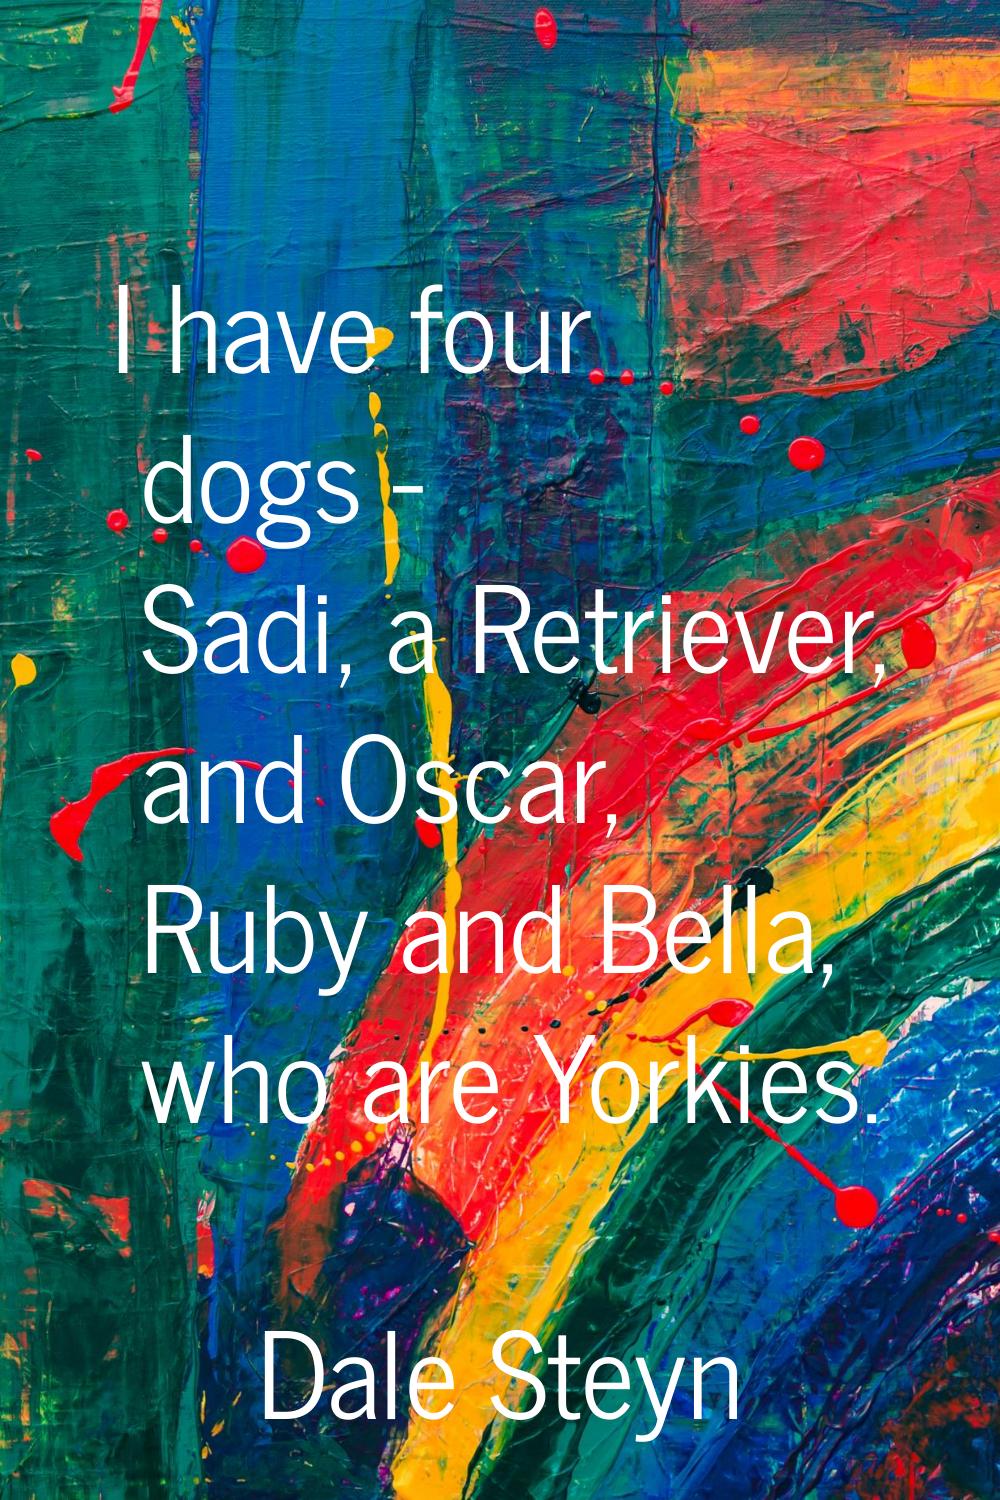 I have four dogs - Sadi, a Retriever, and Oscar, Ruby and Bella, who are Yorkies.